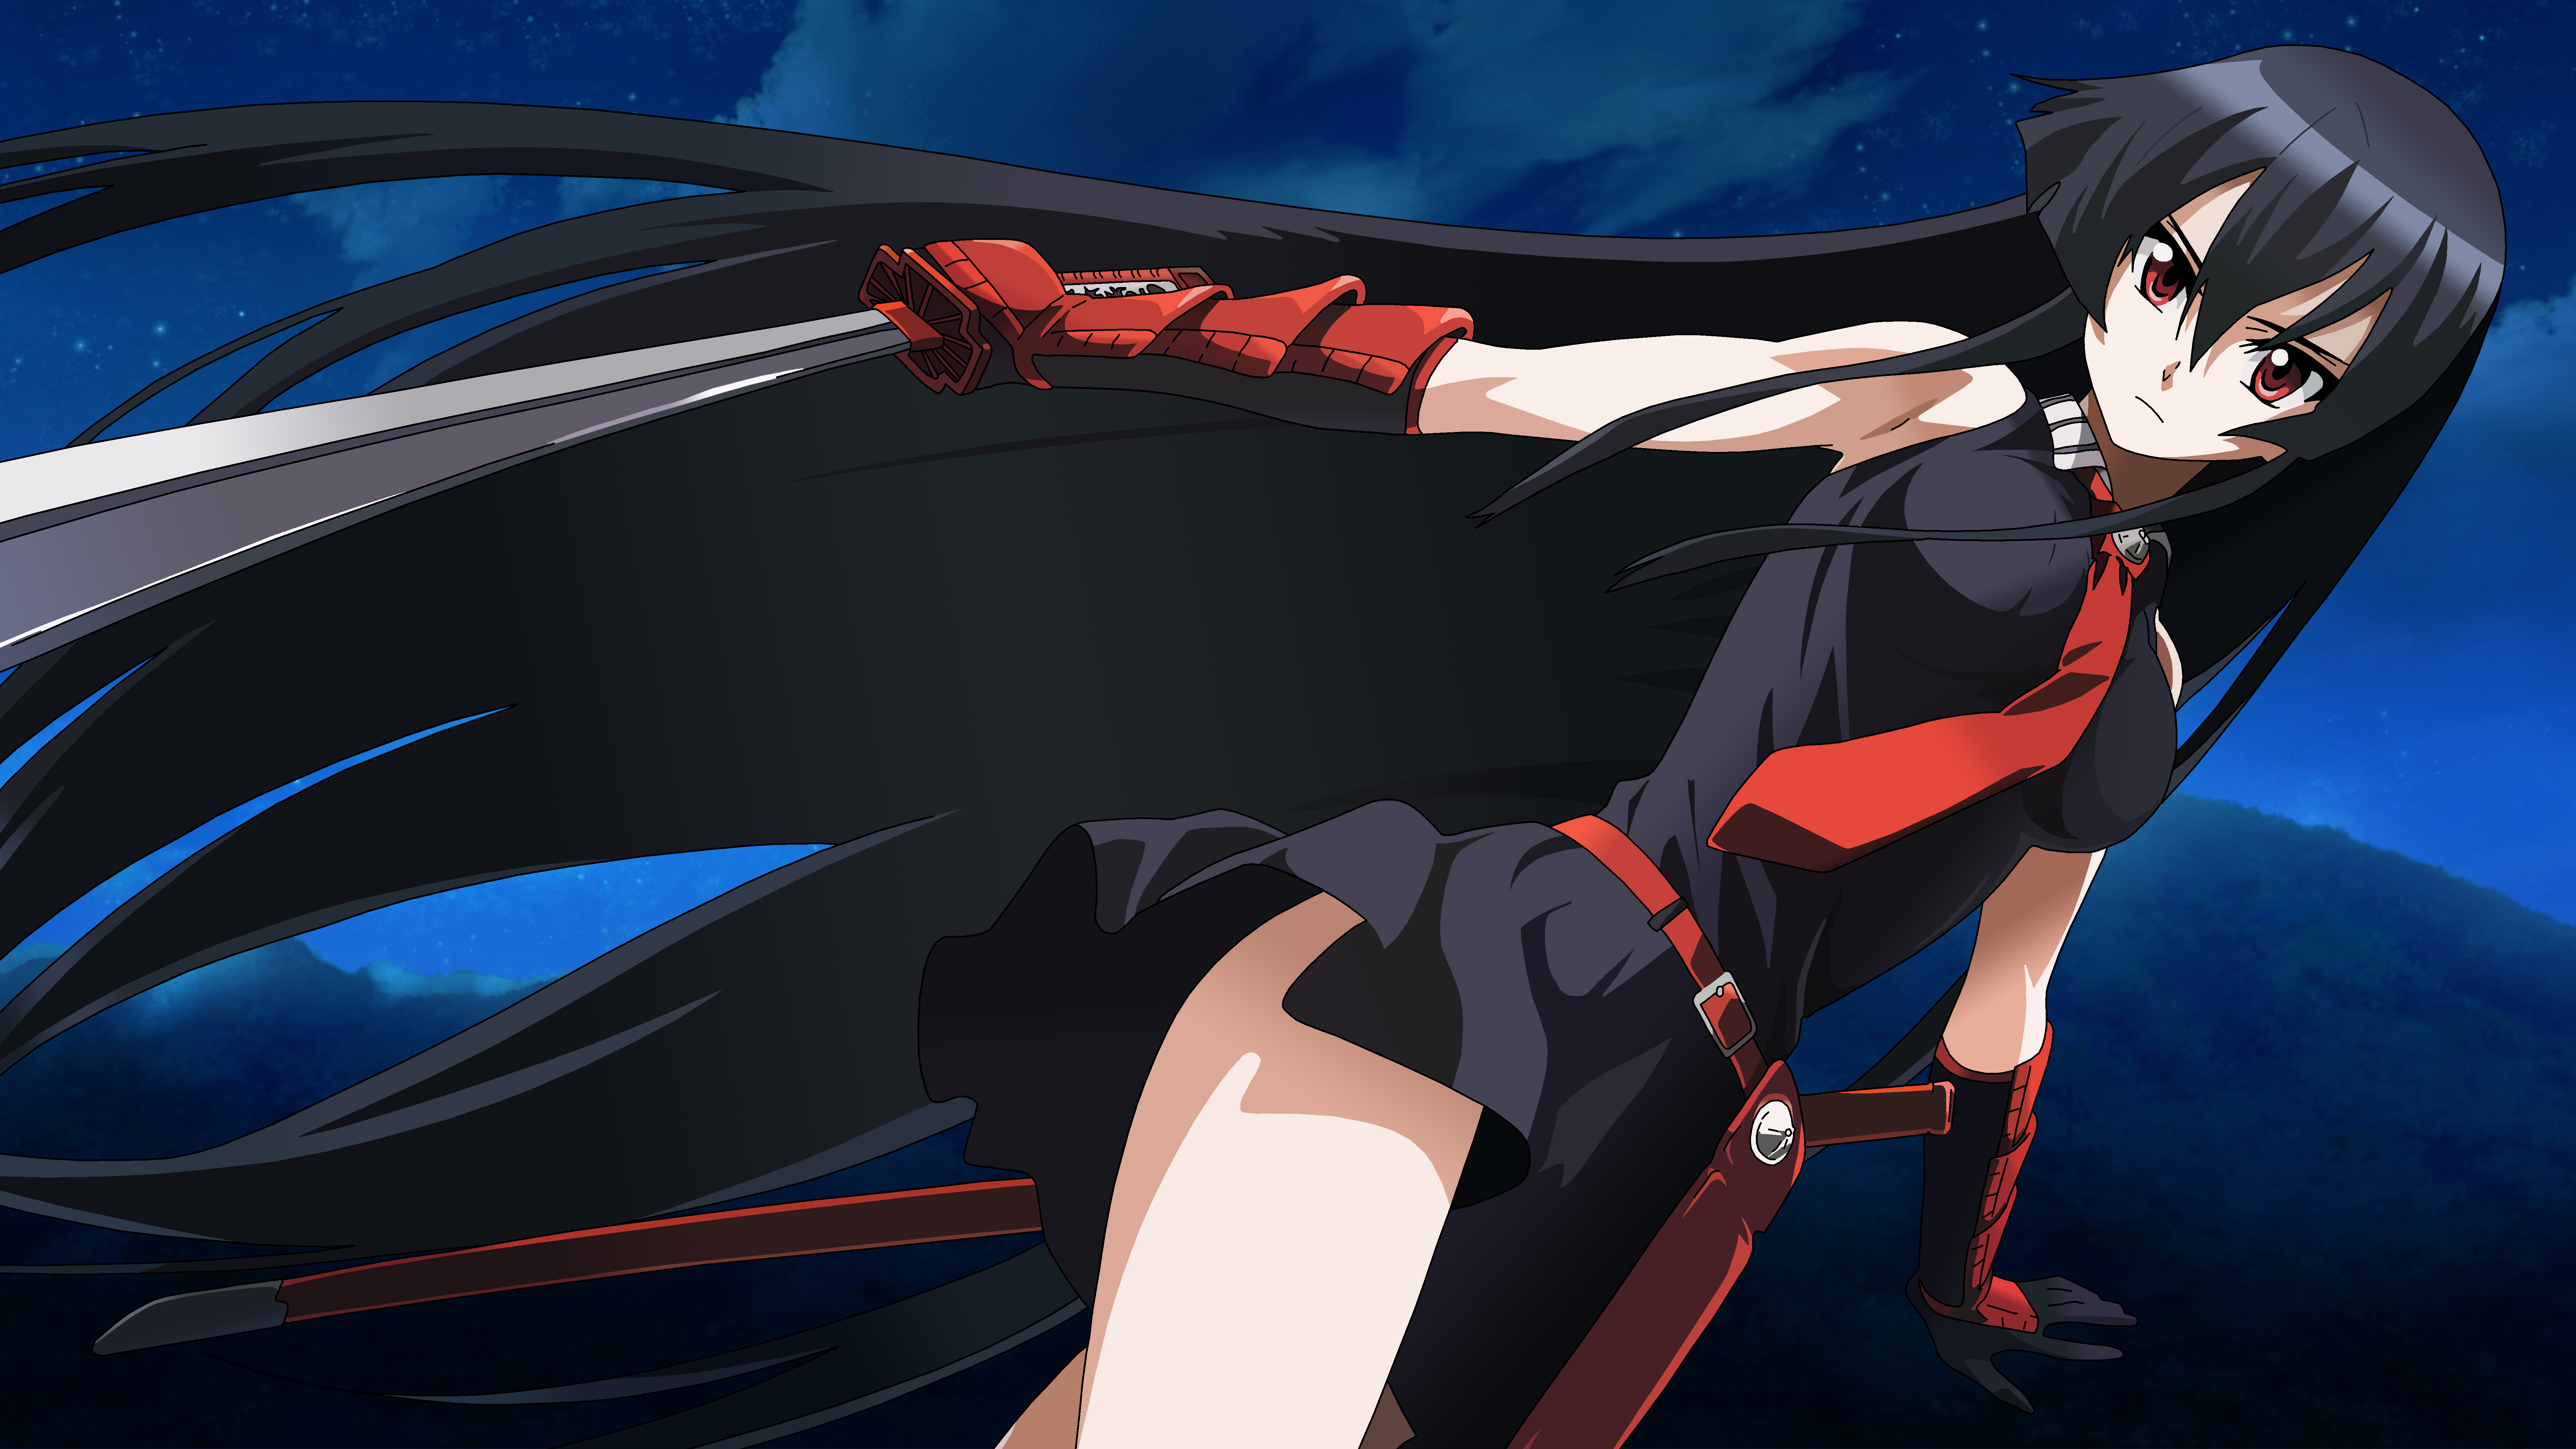  Akame Ga Kill  Wallpapers Pictures Images